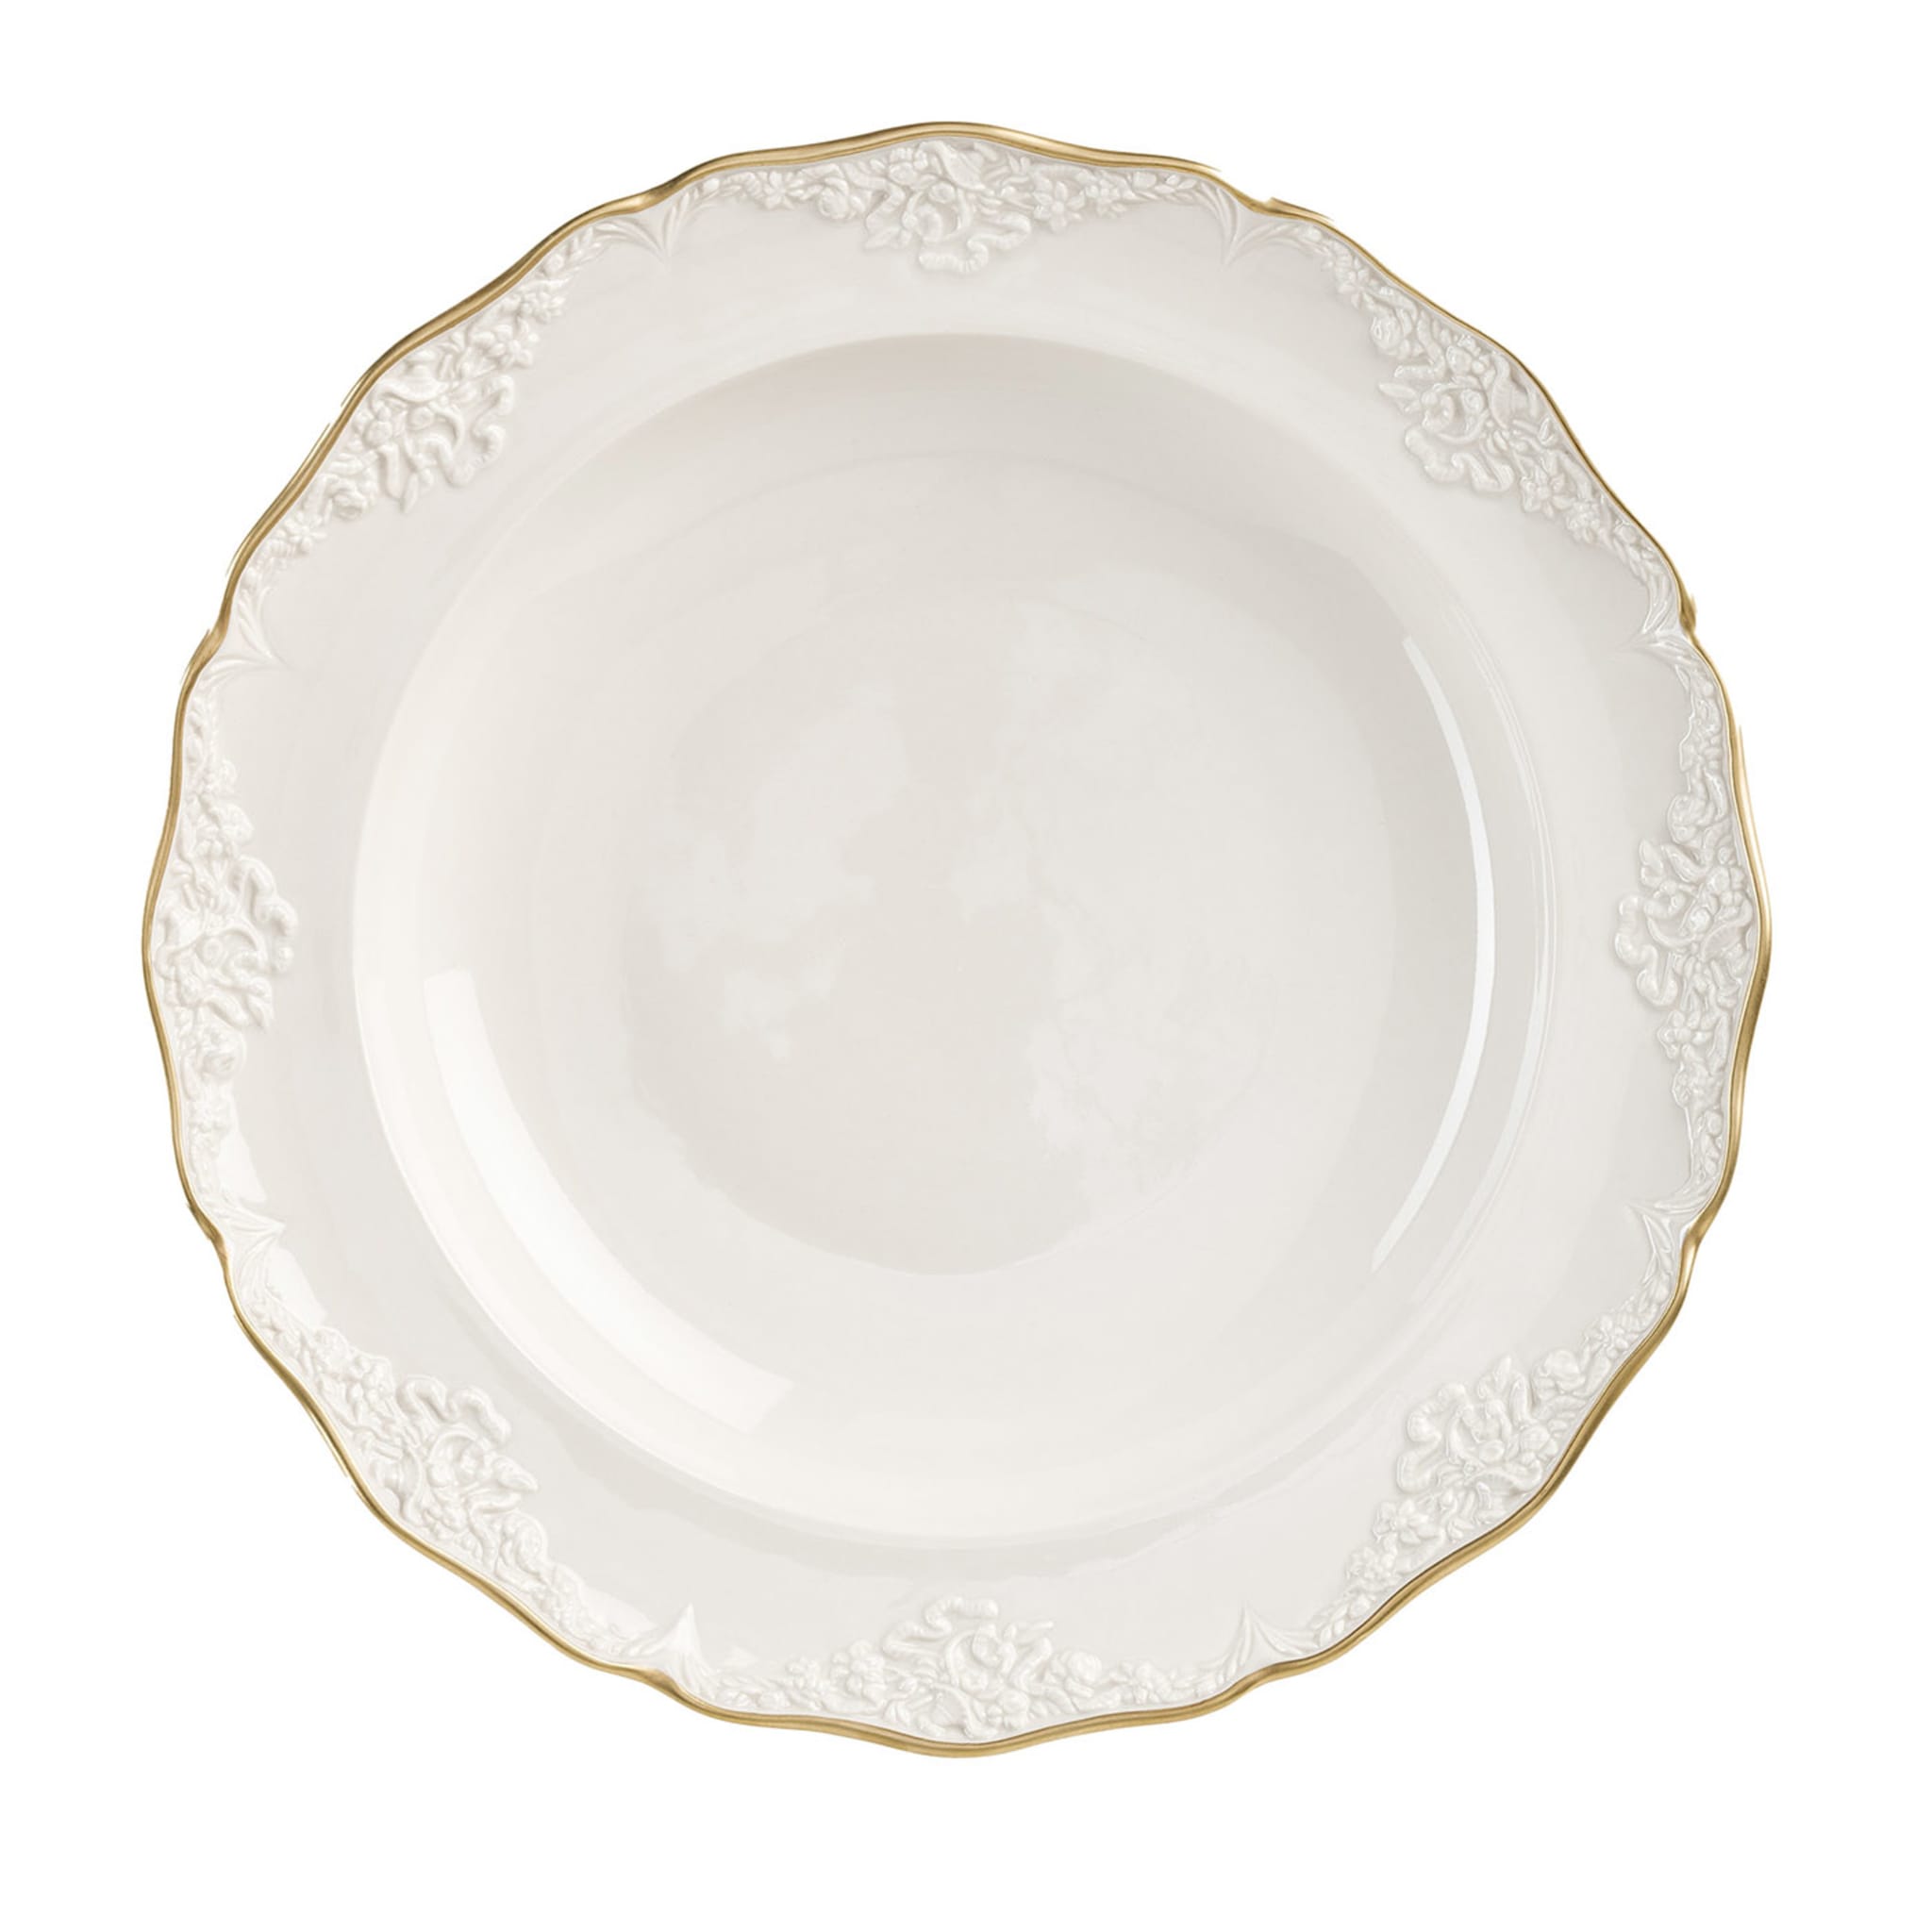 Irene Set of 2 White & Gold Soup Plates - Main view